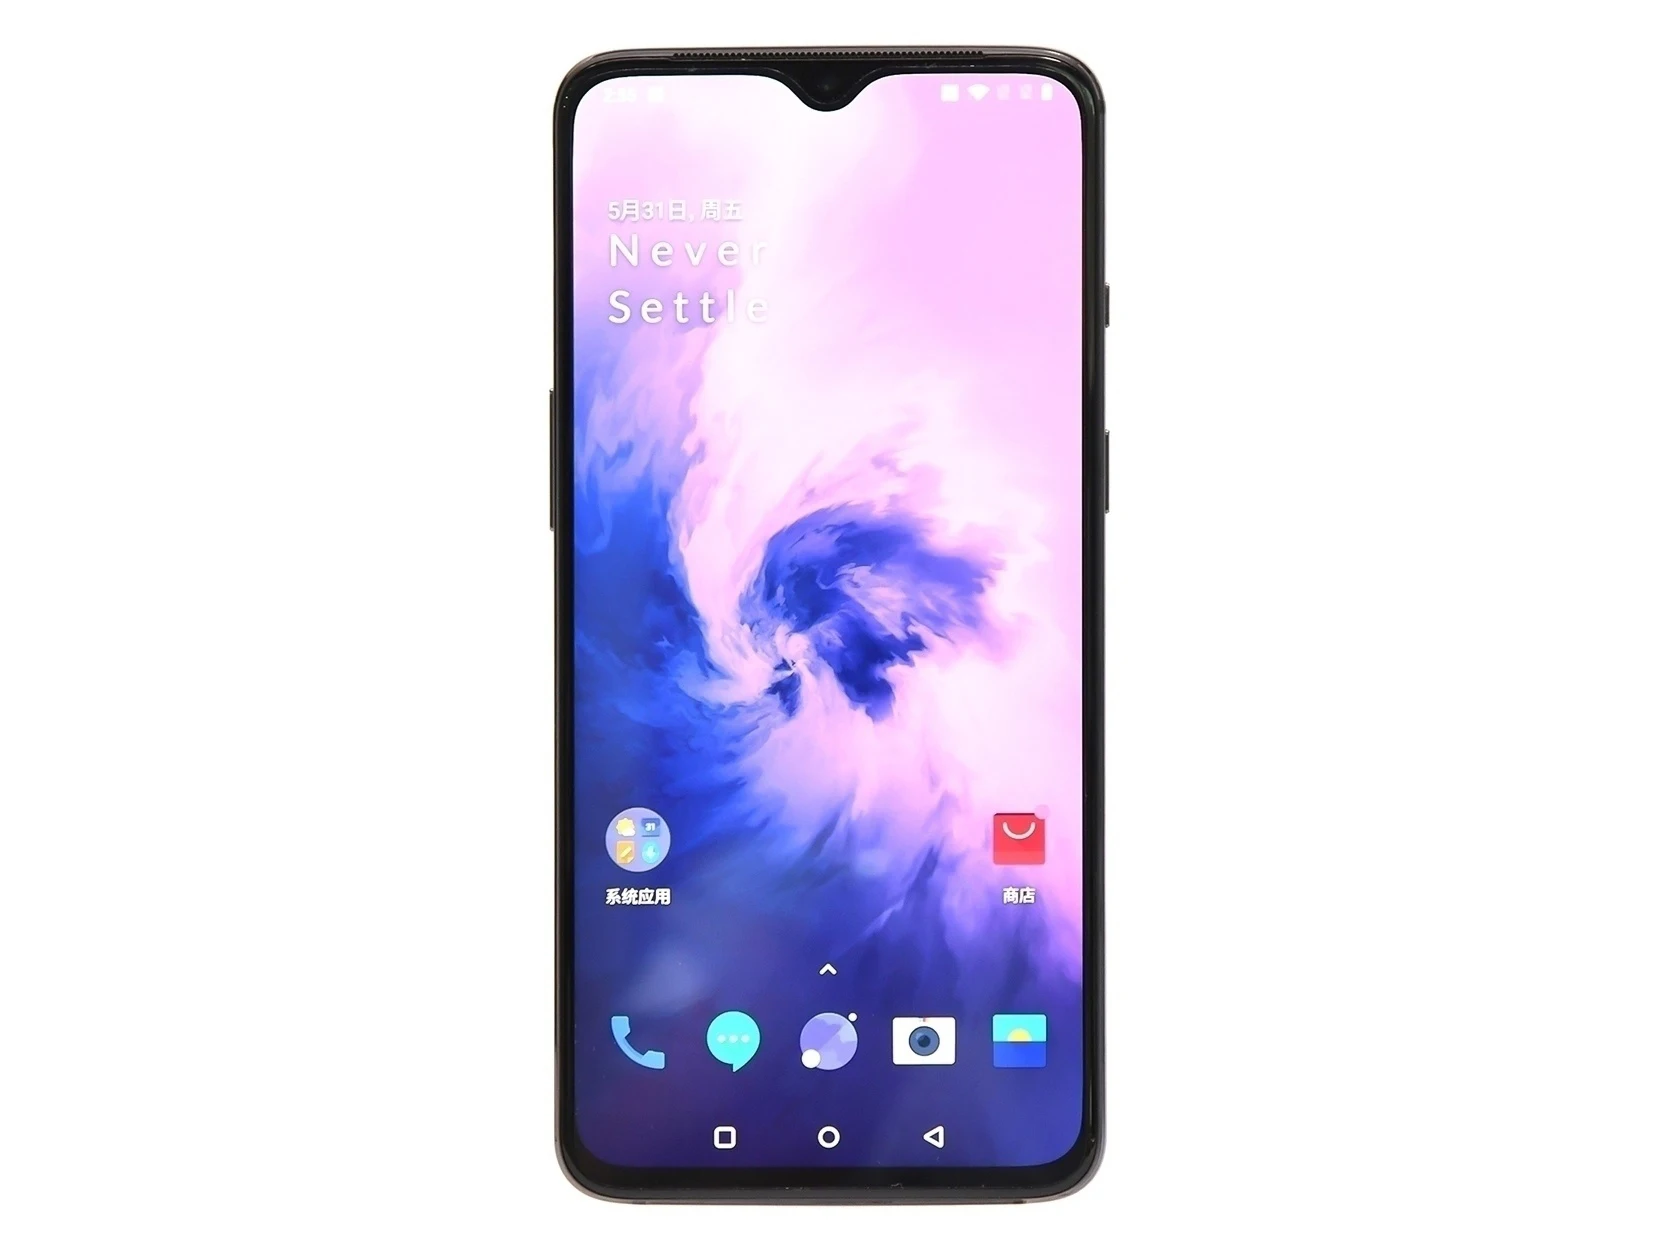 New Original Oneplus 7 Mobile Phone Global Rom 6.41" AMOLED Display Octa Core Snapdragon 855 NFC 1080x2340 pixels Telephone best oneplus nord